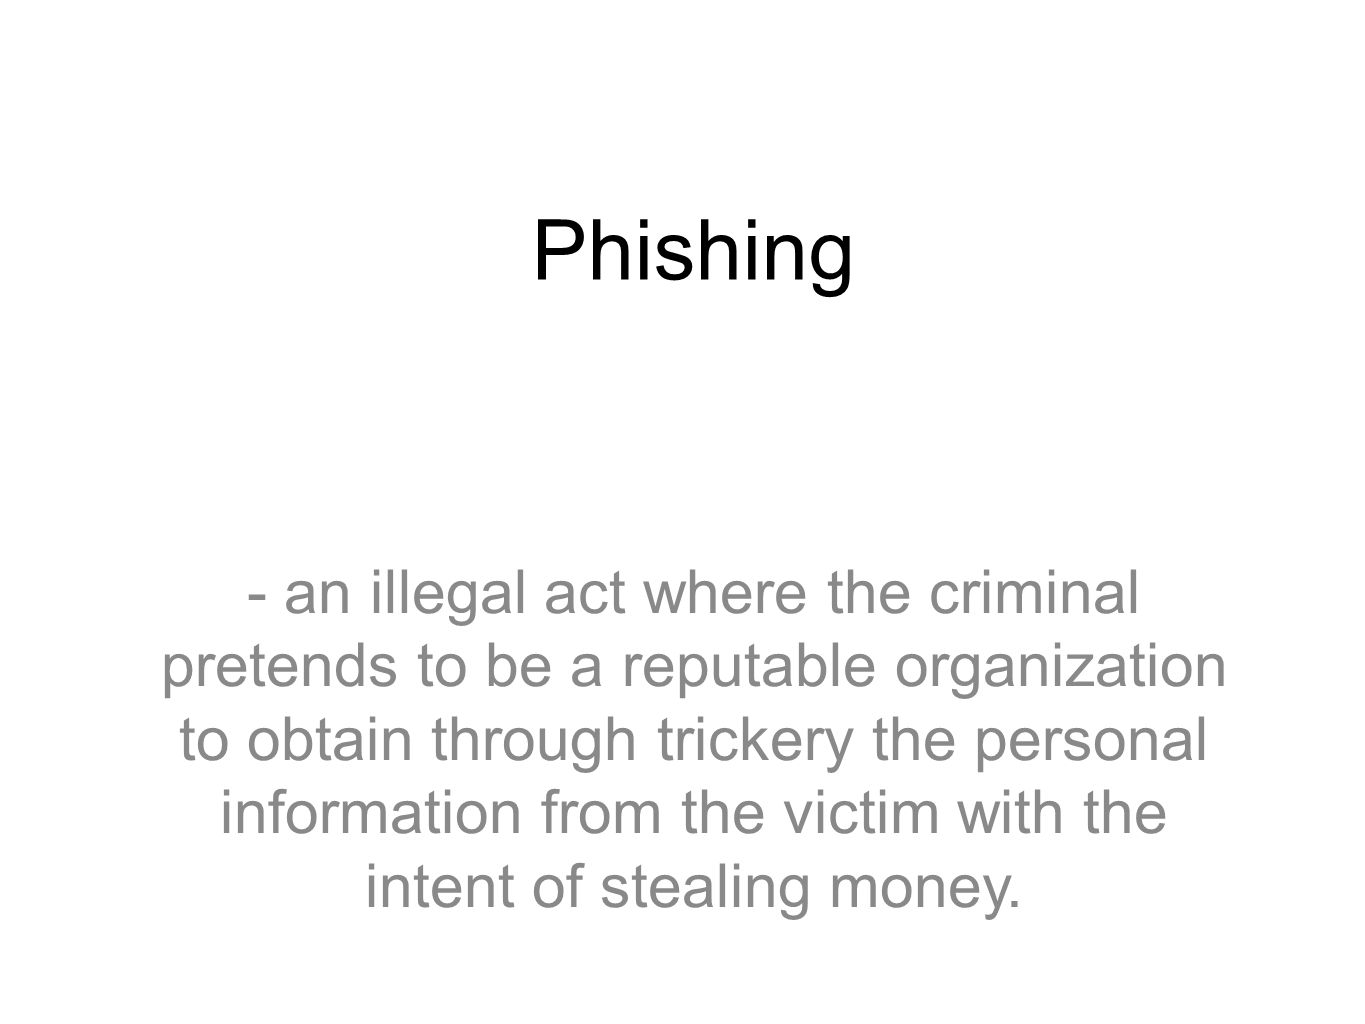 Phishing - an illegal act where the criminal pretends to be a reputable organization to obtain through trickery the personal information from the victim with the intent of stealing money.